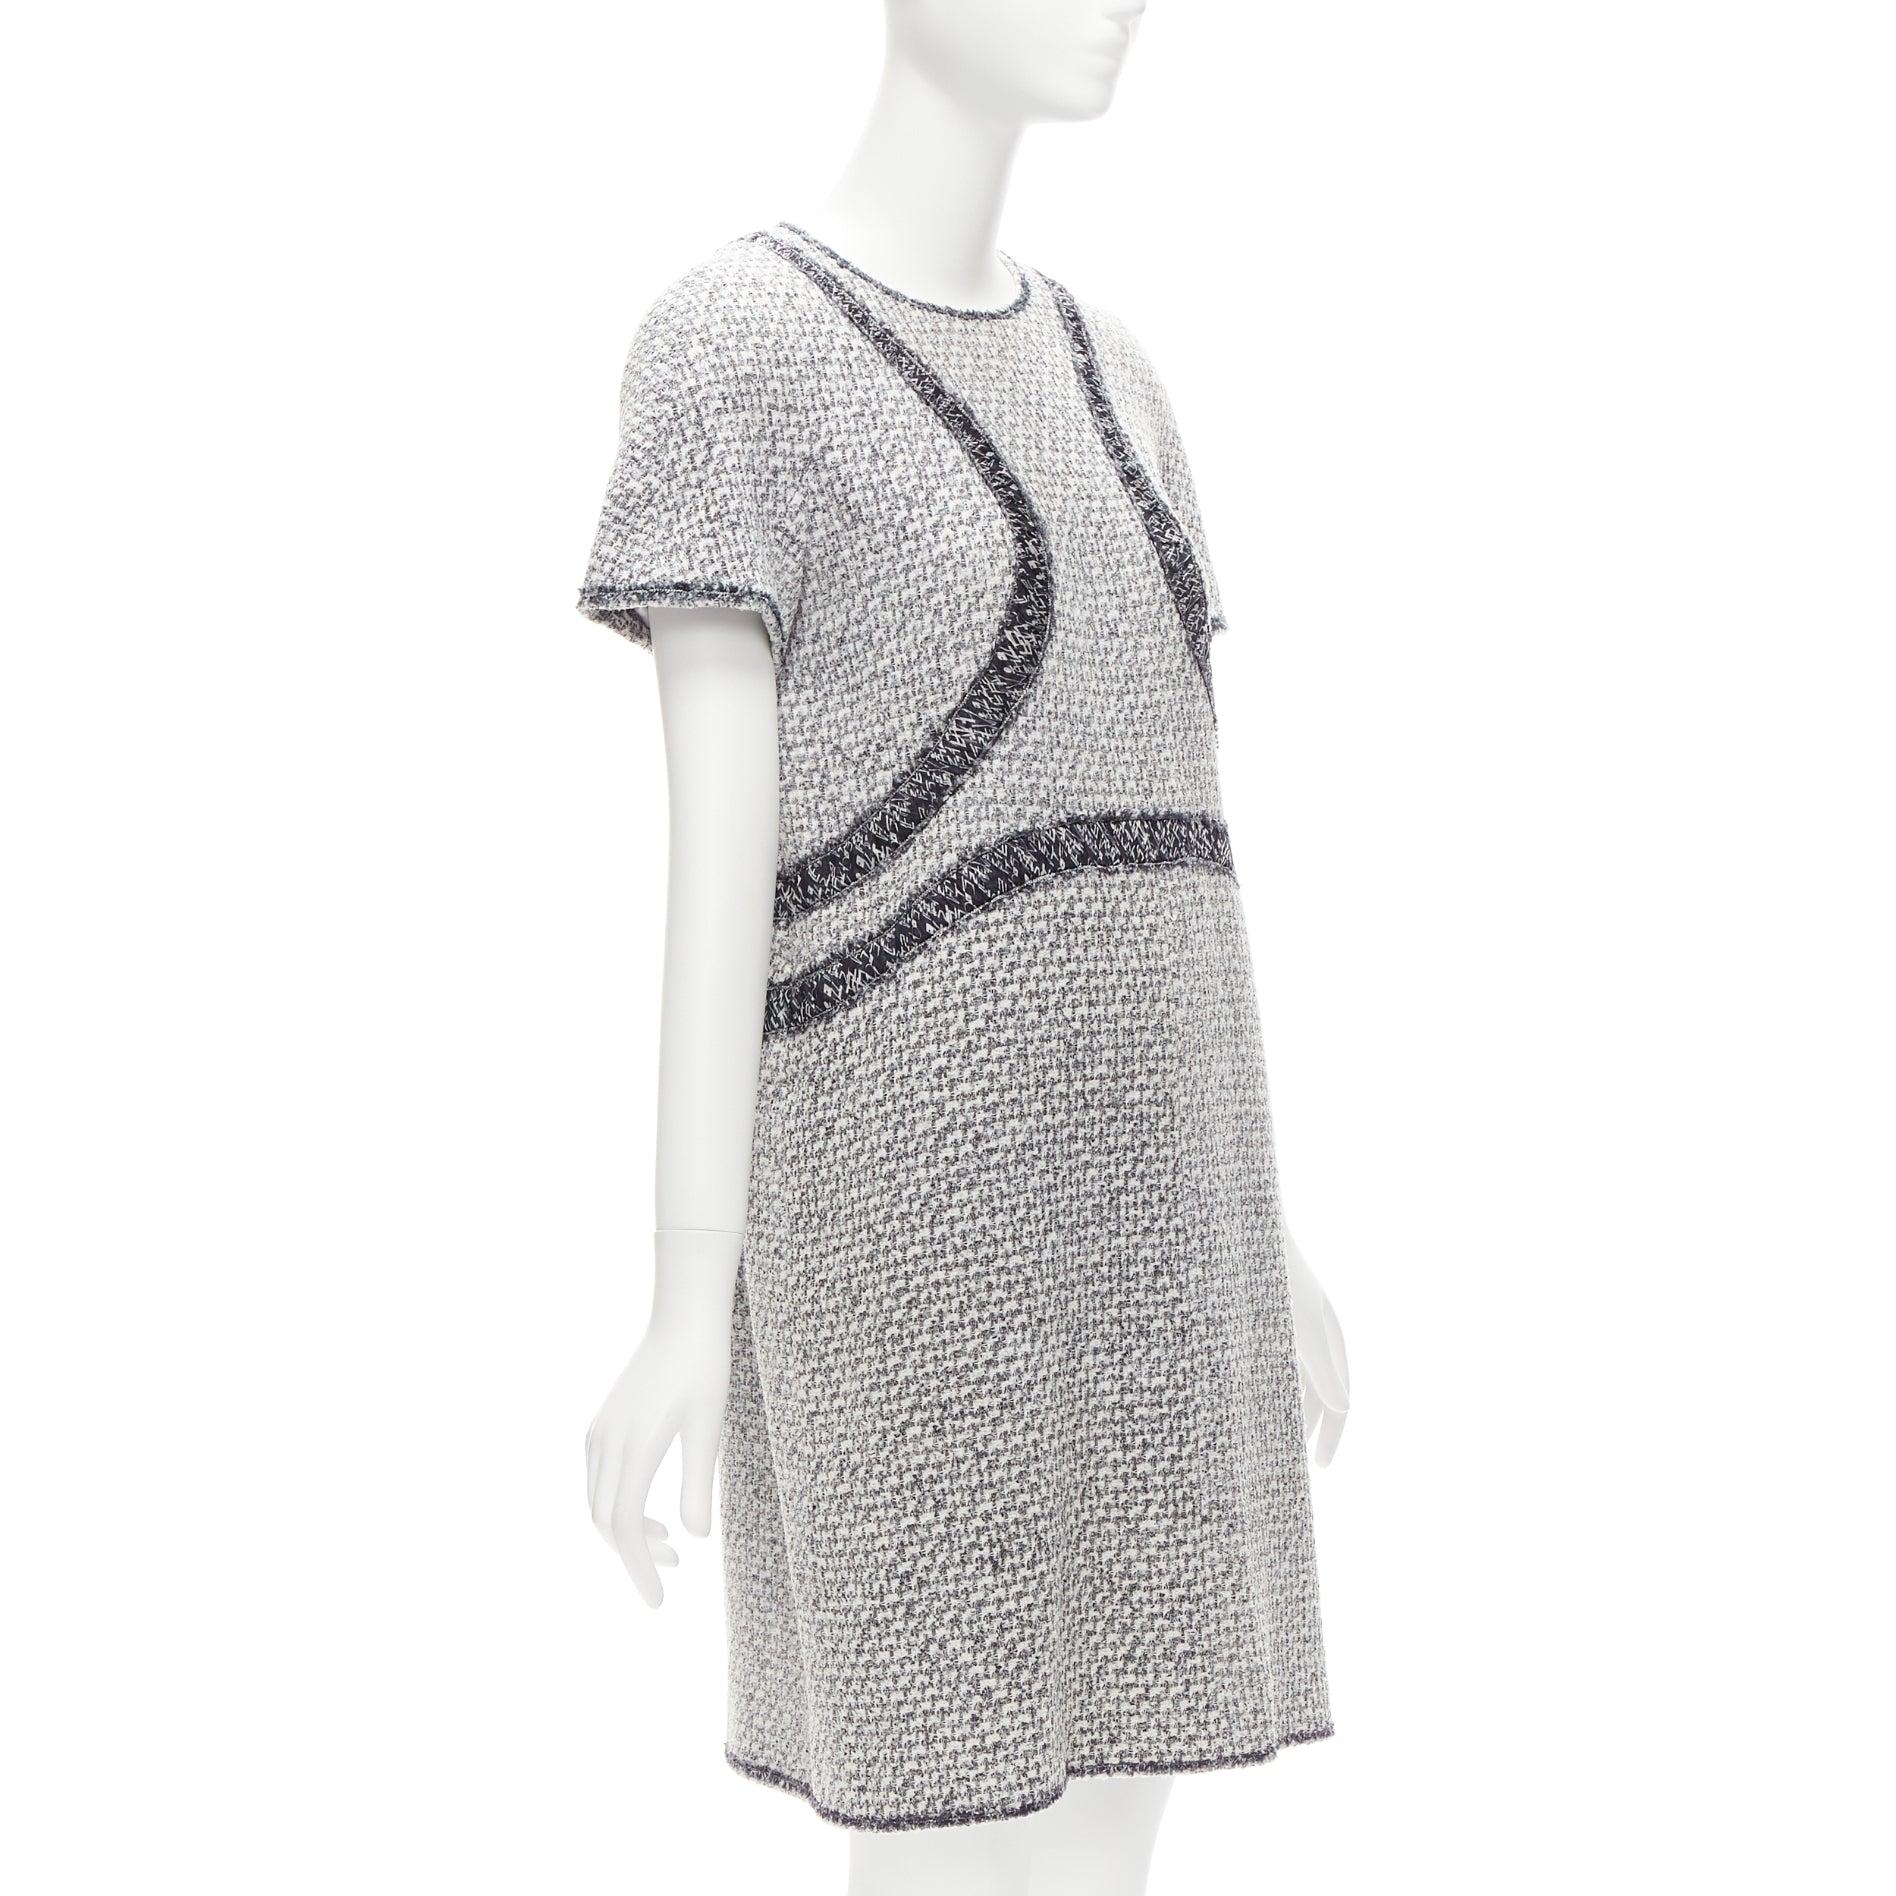 CHANEL 13P grey graphic panels Fantasy Tweed shift dress FR46 3XL
Reference: TGAS/D00888
Brand: Chanel
Designer: Karl Lagerfeld
Collection: 13P
As seen on: Han Hyo Joo
Material: Tweed
Color: Grey
Pattern: Tweed
Closure: Zip
Lining: Grey Silk
Extra